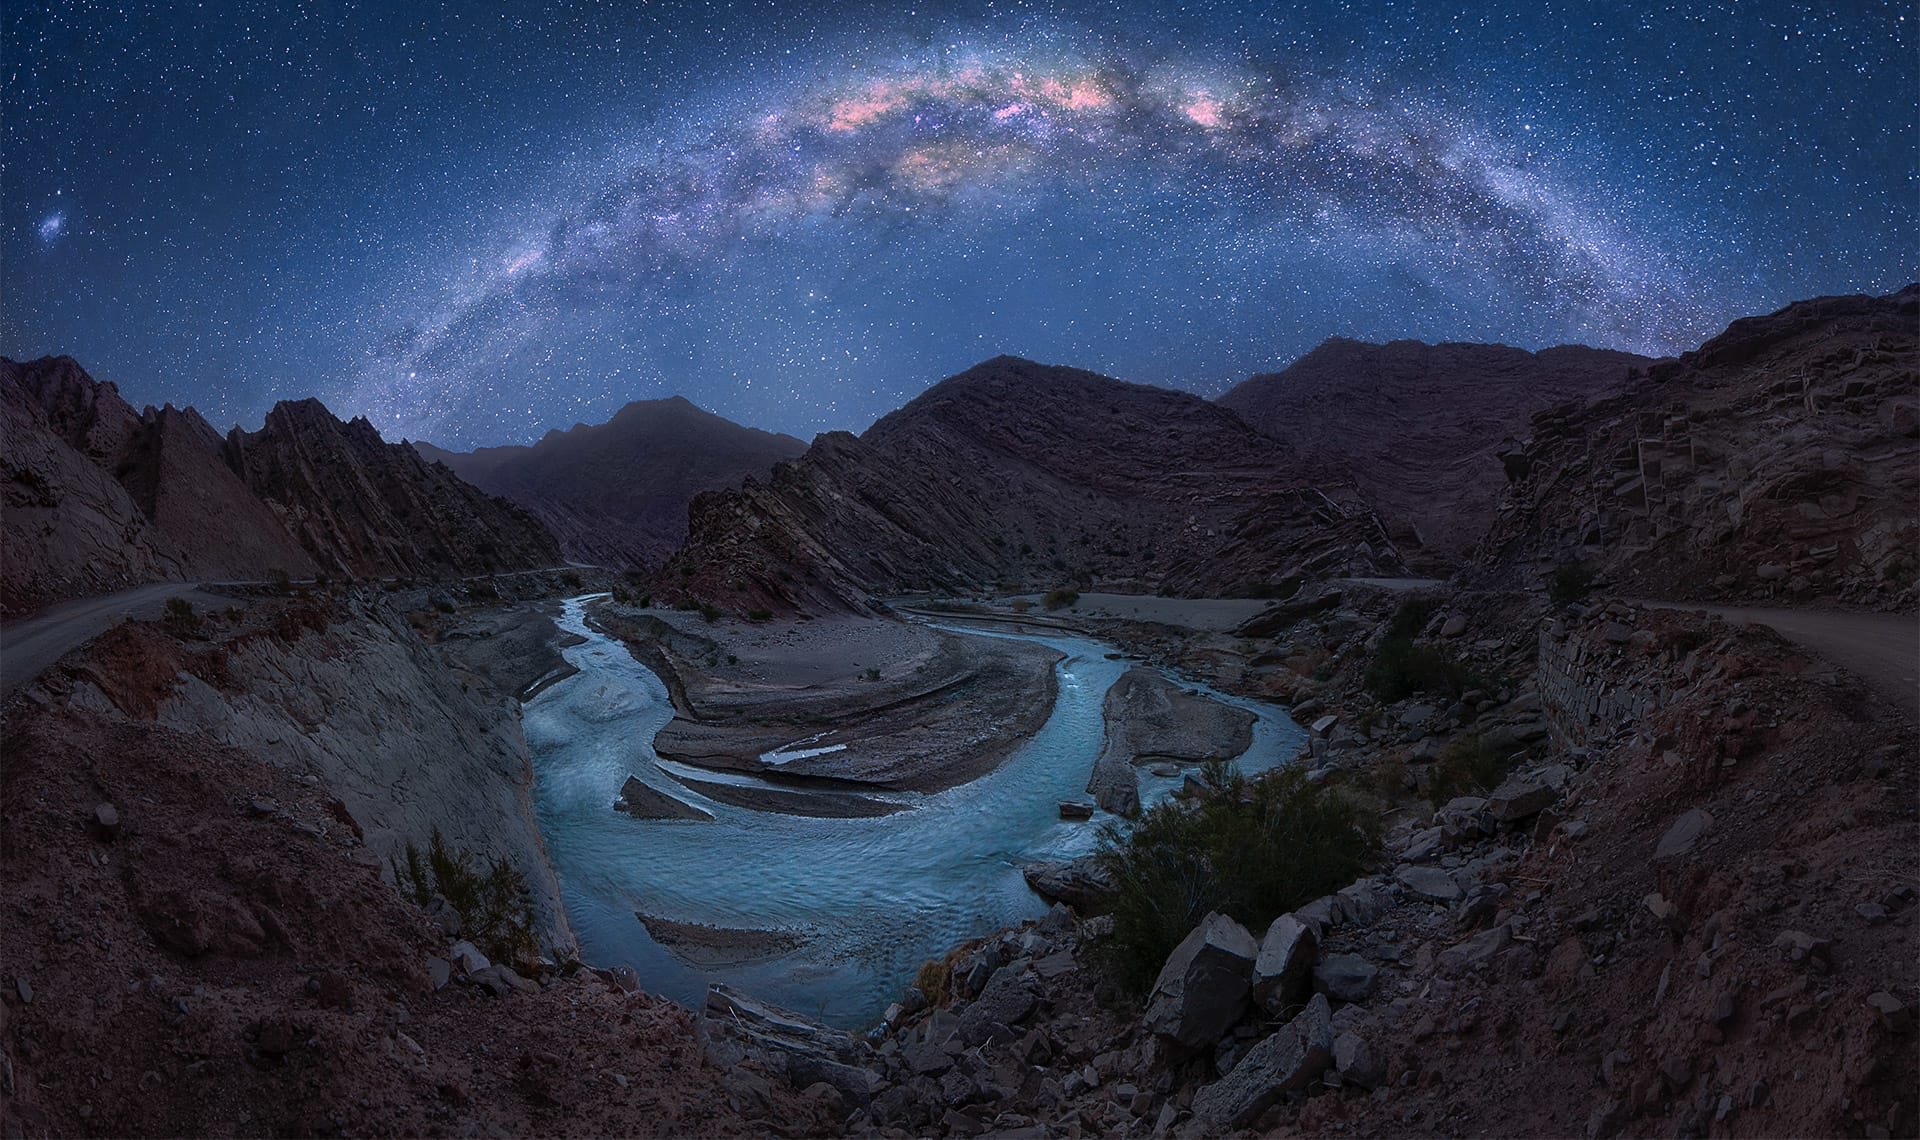 Milky Way photographer of the year Argentina